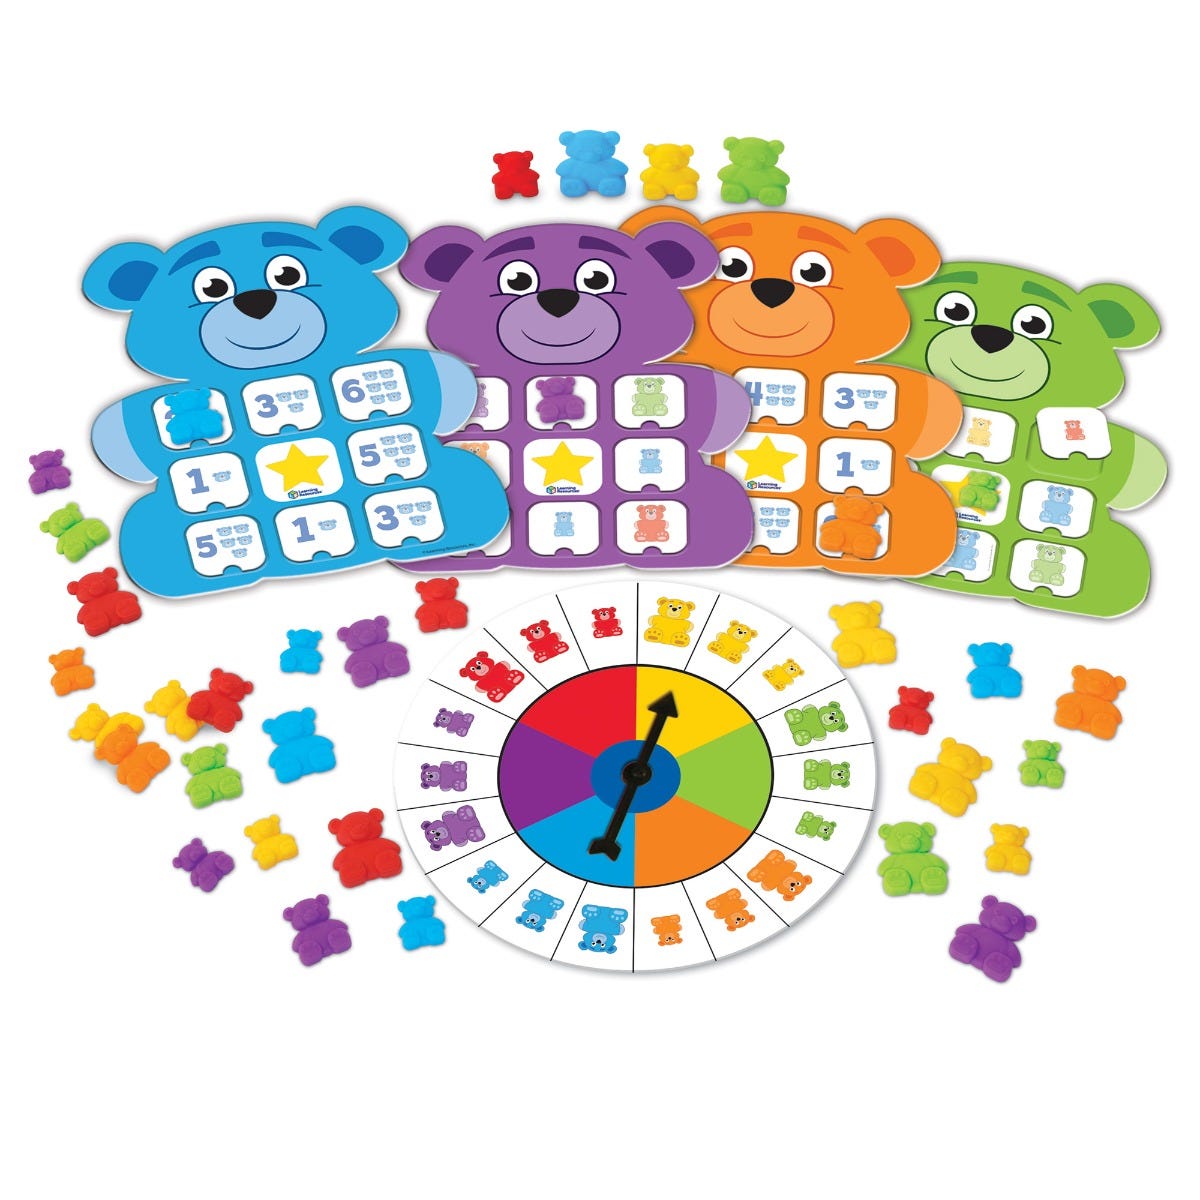 Bingo Bears, Children build preschool skills with Bingo Bears, the smart twist on a classic game. Bingo Bears helps young children practise number and colour identification, as well as size comparison skills through fun game play. After children build their bingo cards, they can play two different games which are match pieces by number, or sort by size and colour. This game is ideal for playing in the classroom or during family games night, and because there’s no reading needed, it’s suitable for children a